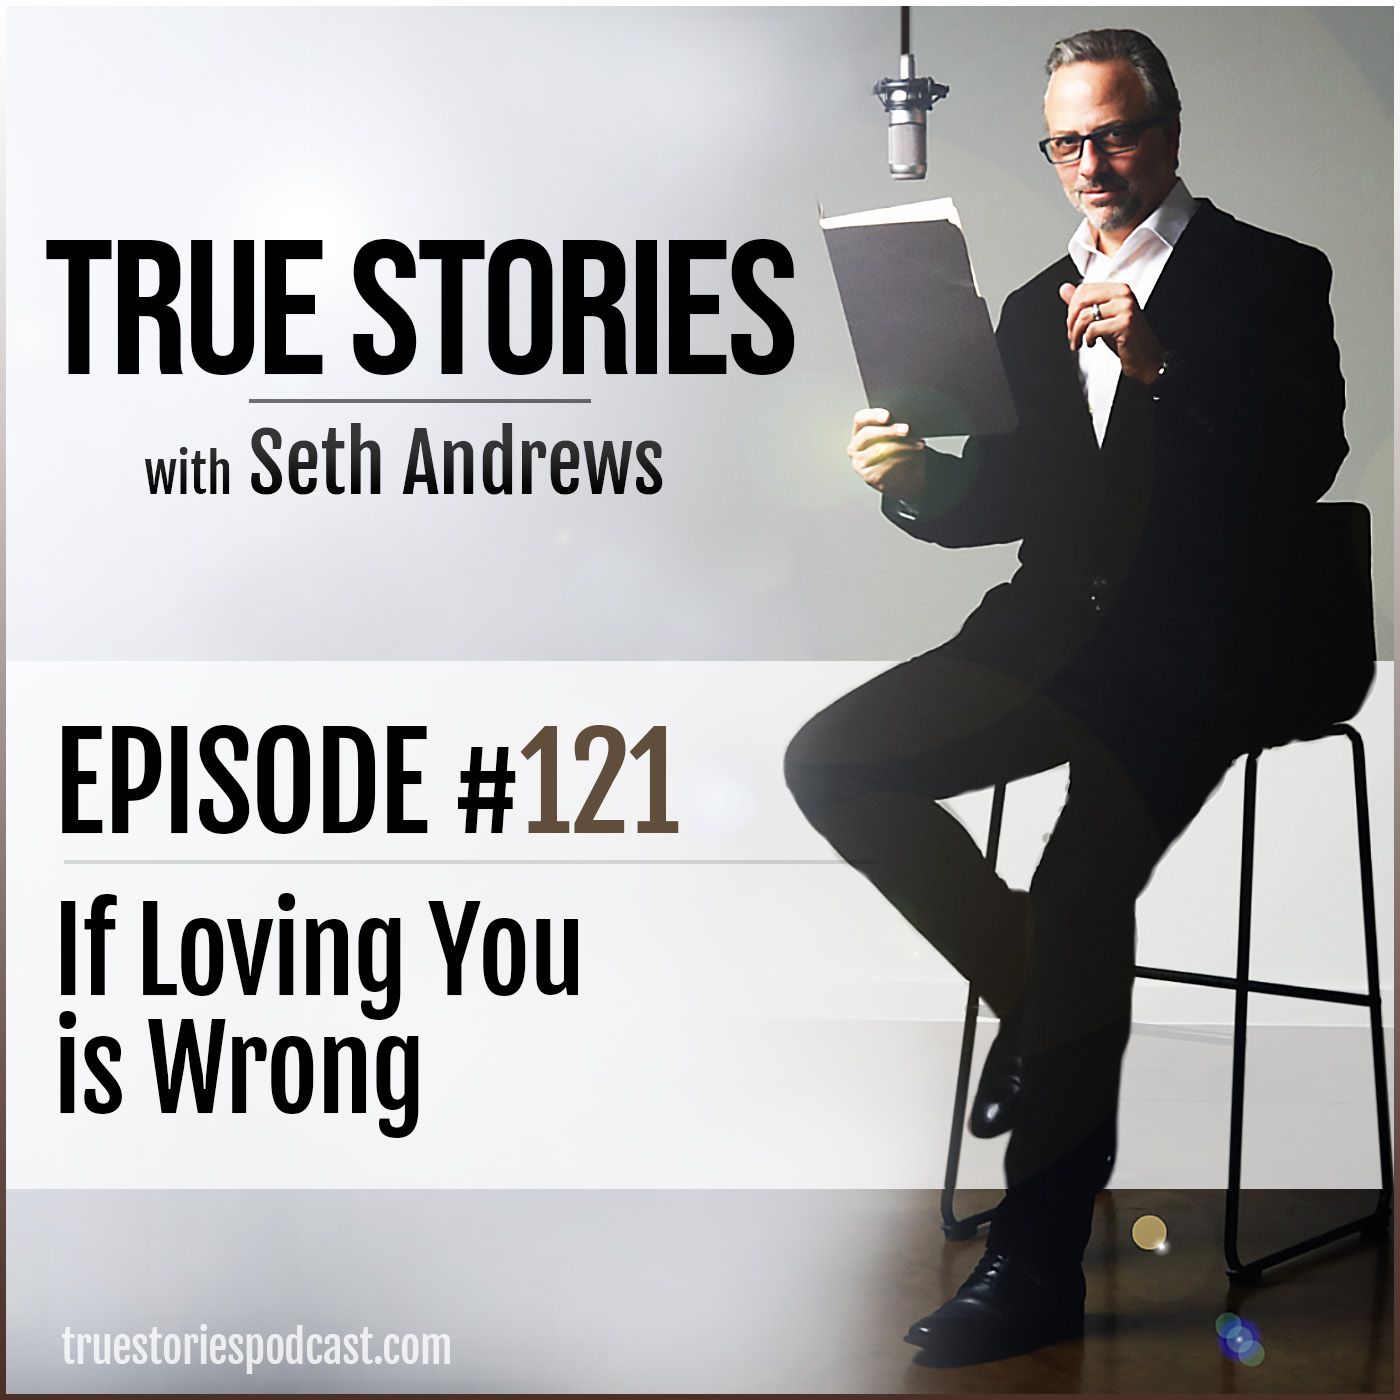 True Stories #121 - If Loving You is Wrong